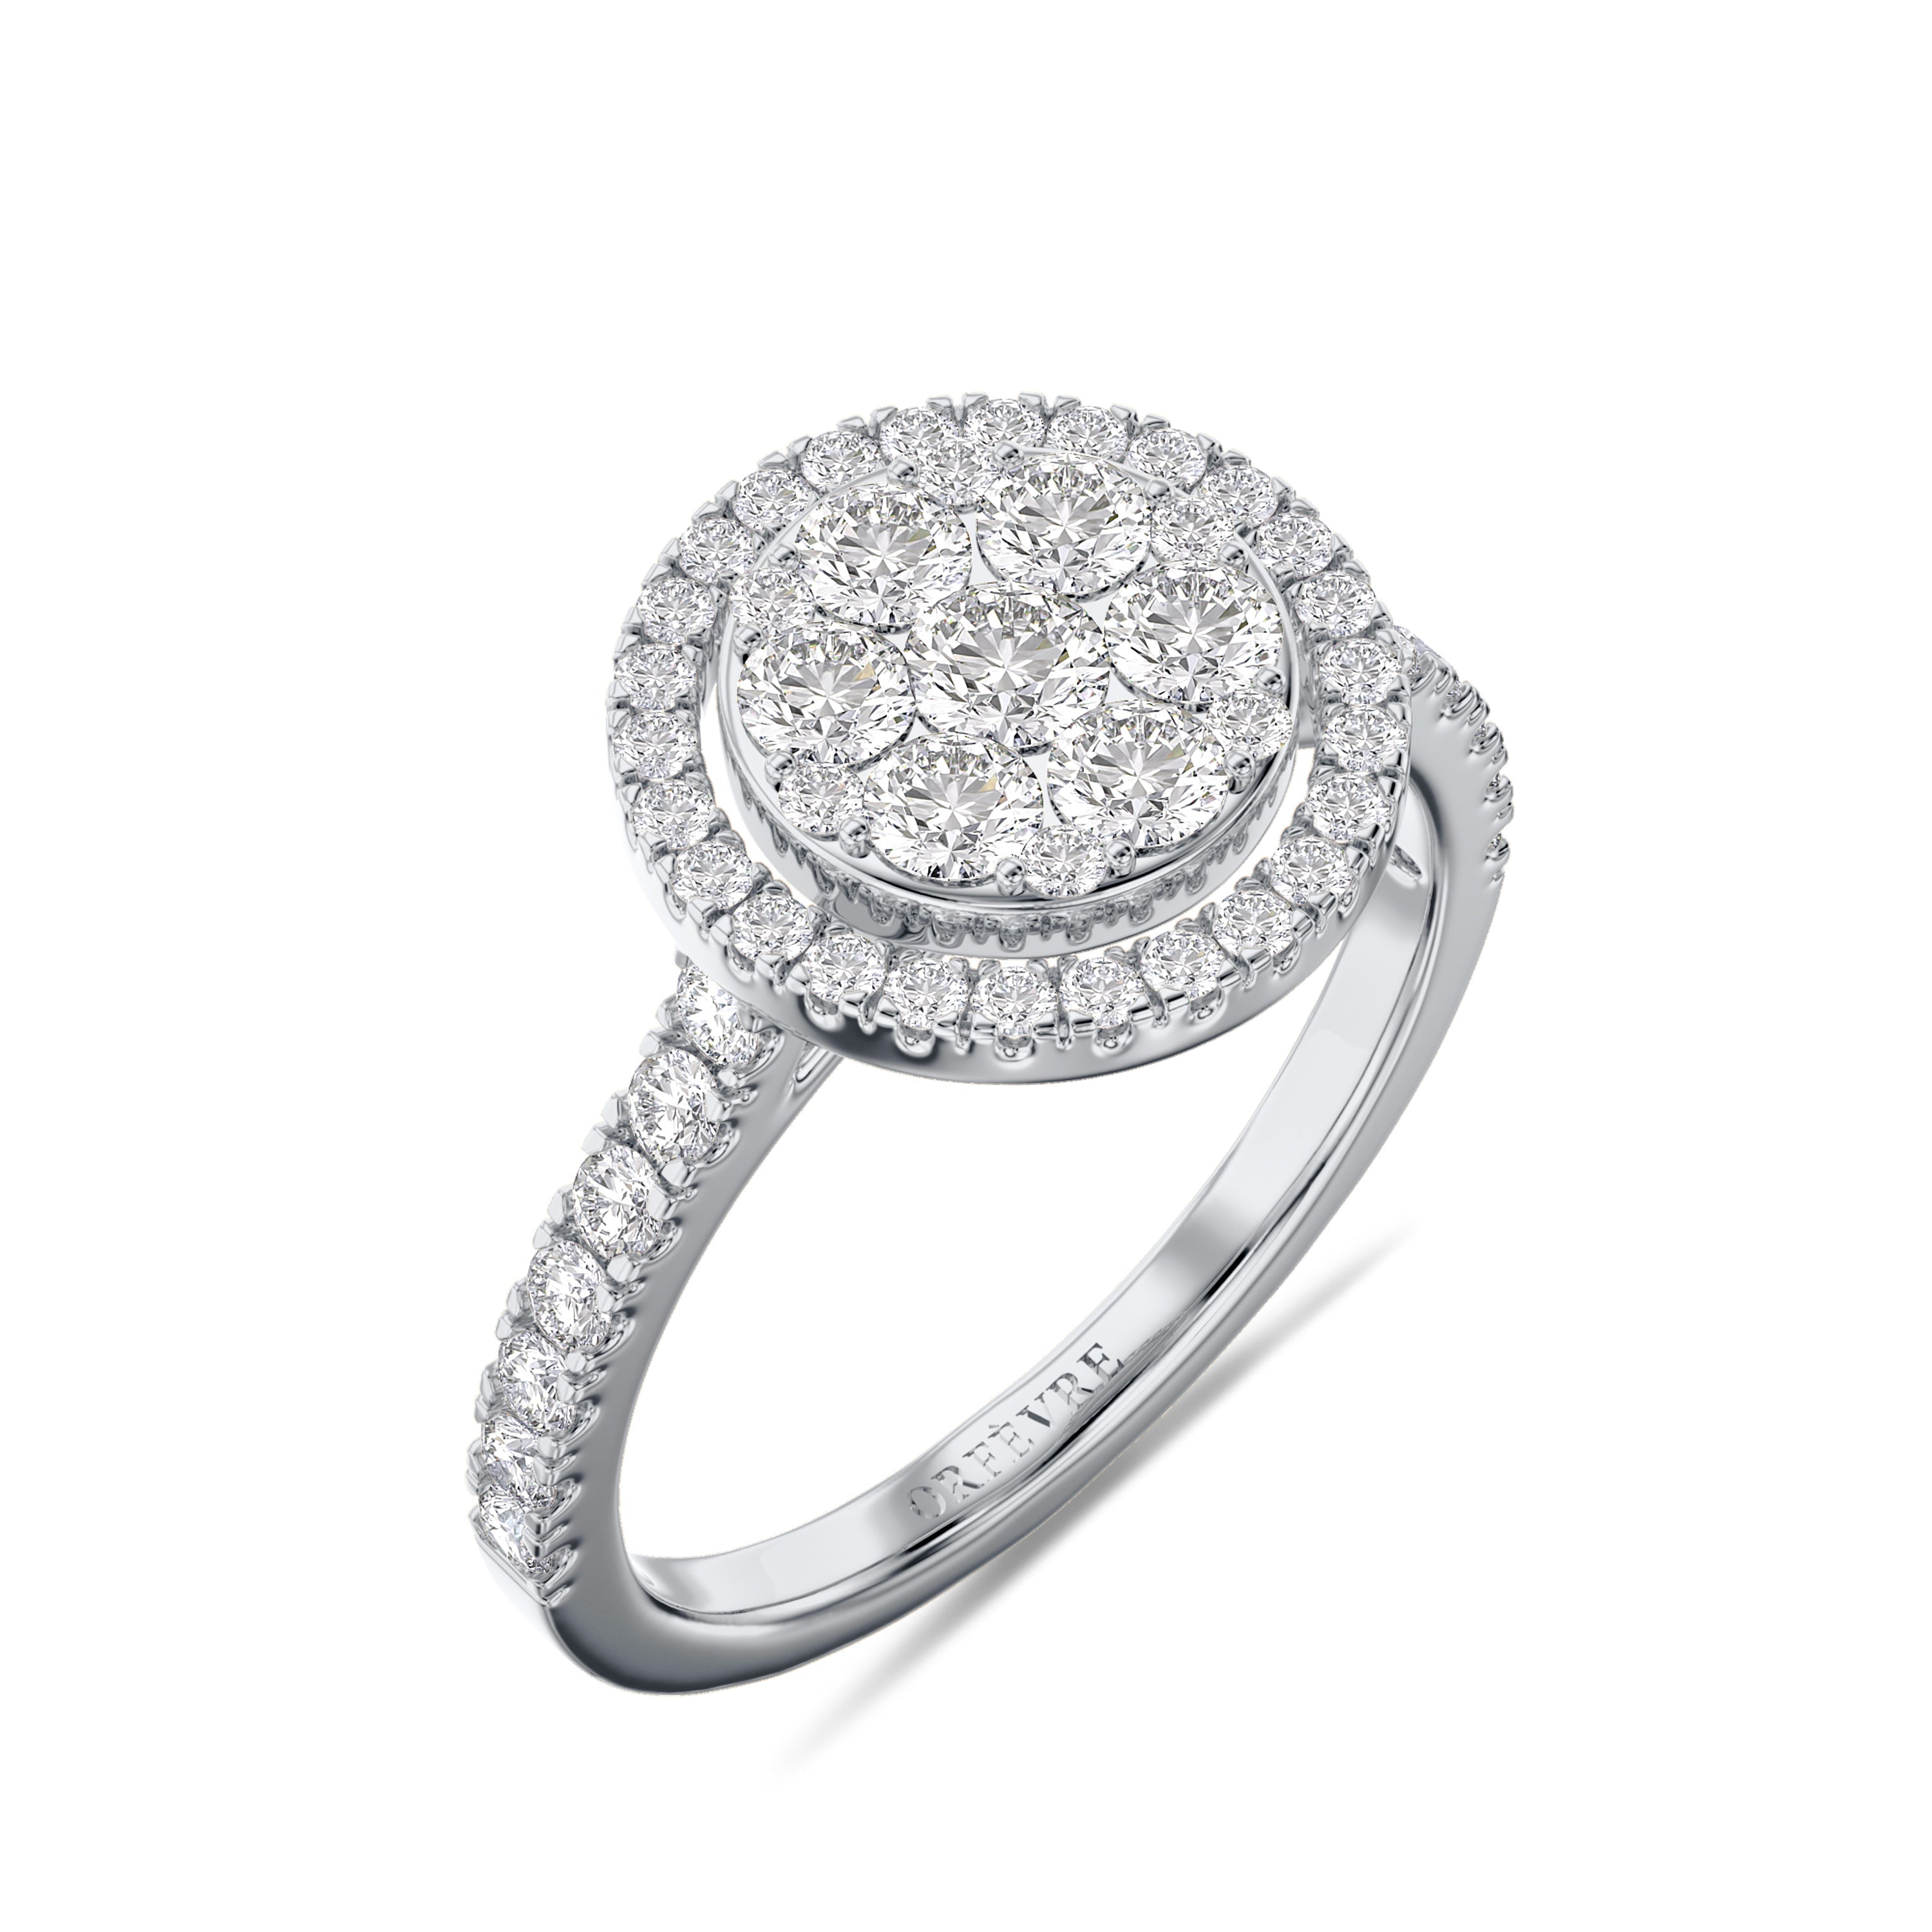 18K white gold halo diamond ring in 1.1 carat, FG color and SI clarity